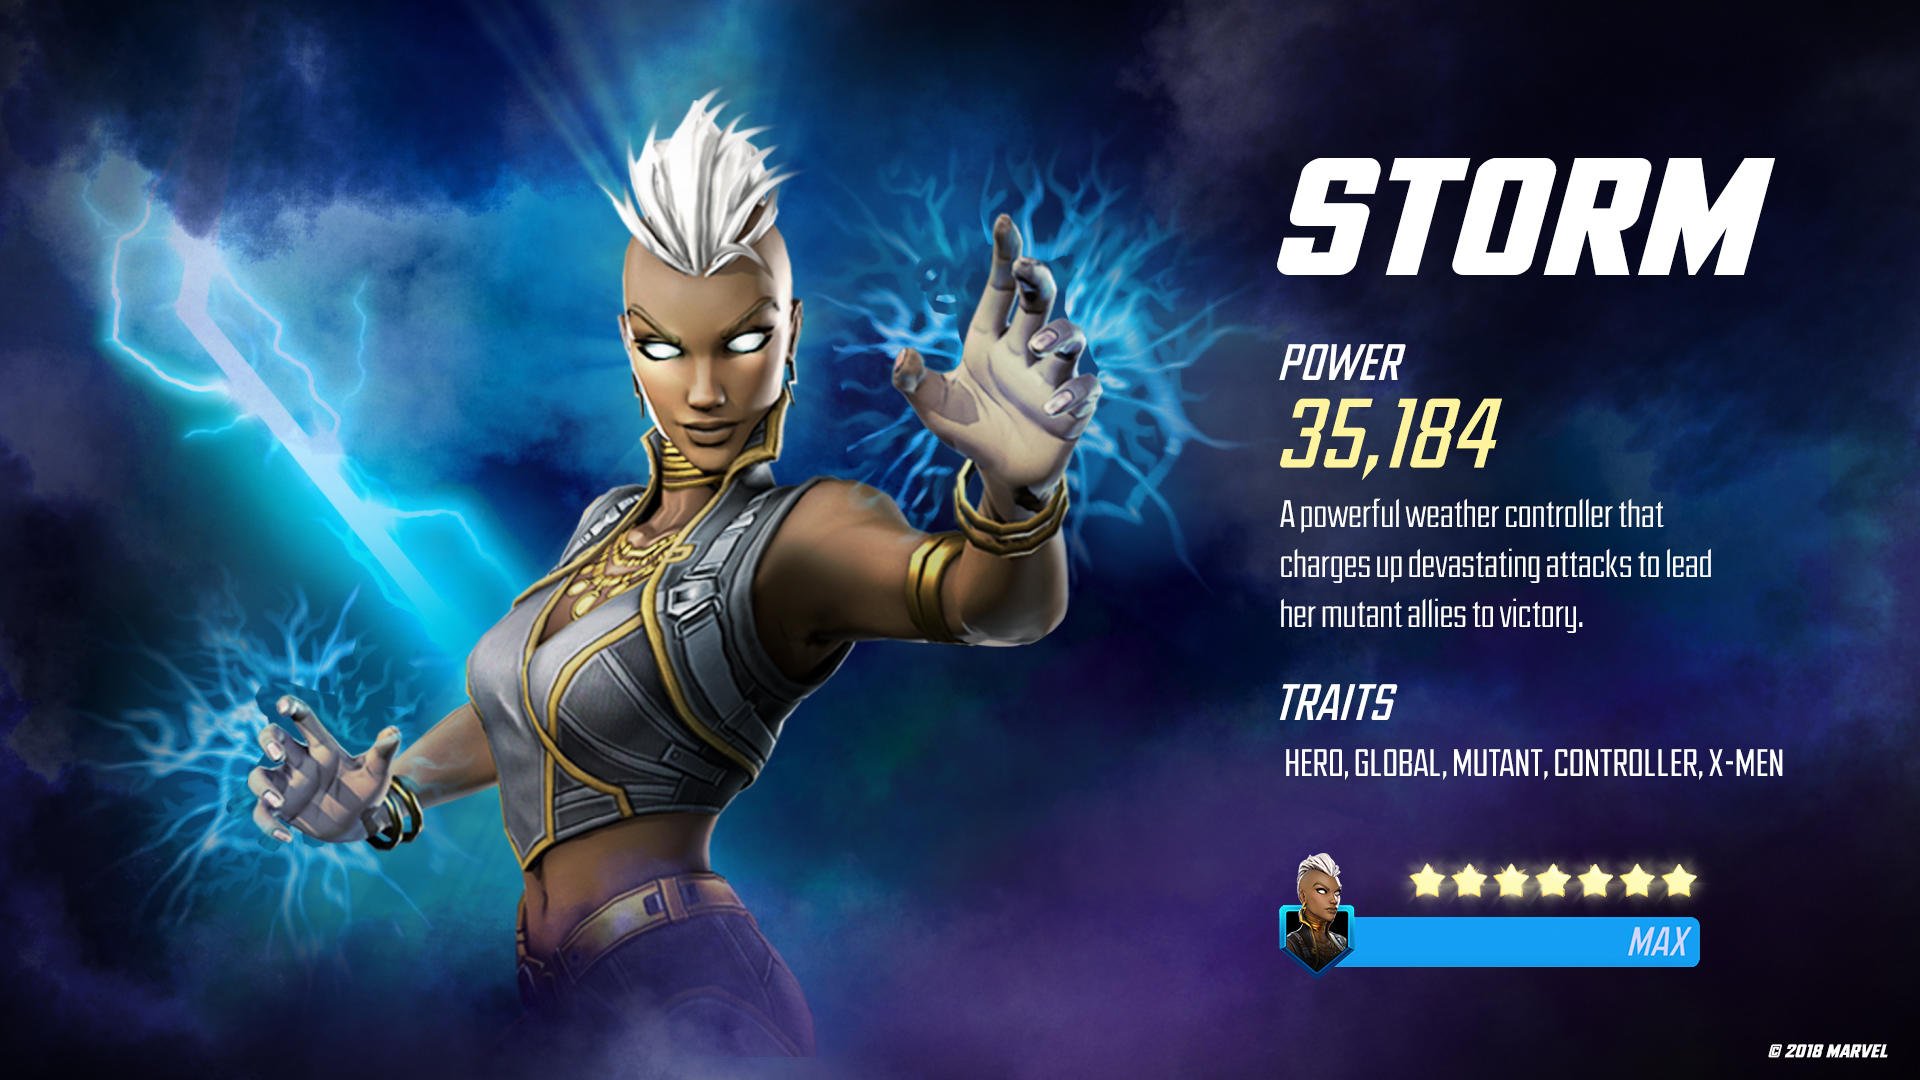 Marvel Strike Force on Twitter "⚡🌩️⚡ Storm has joined the